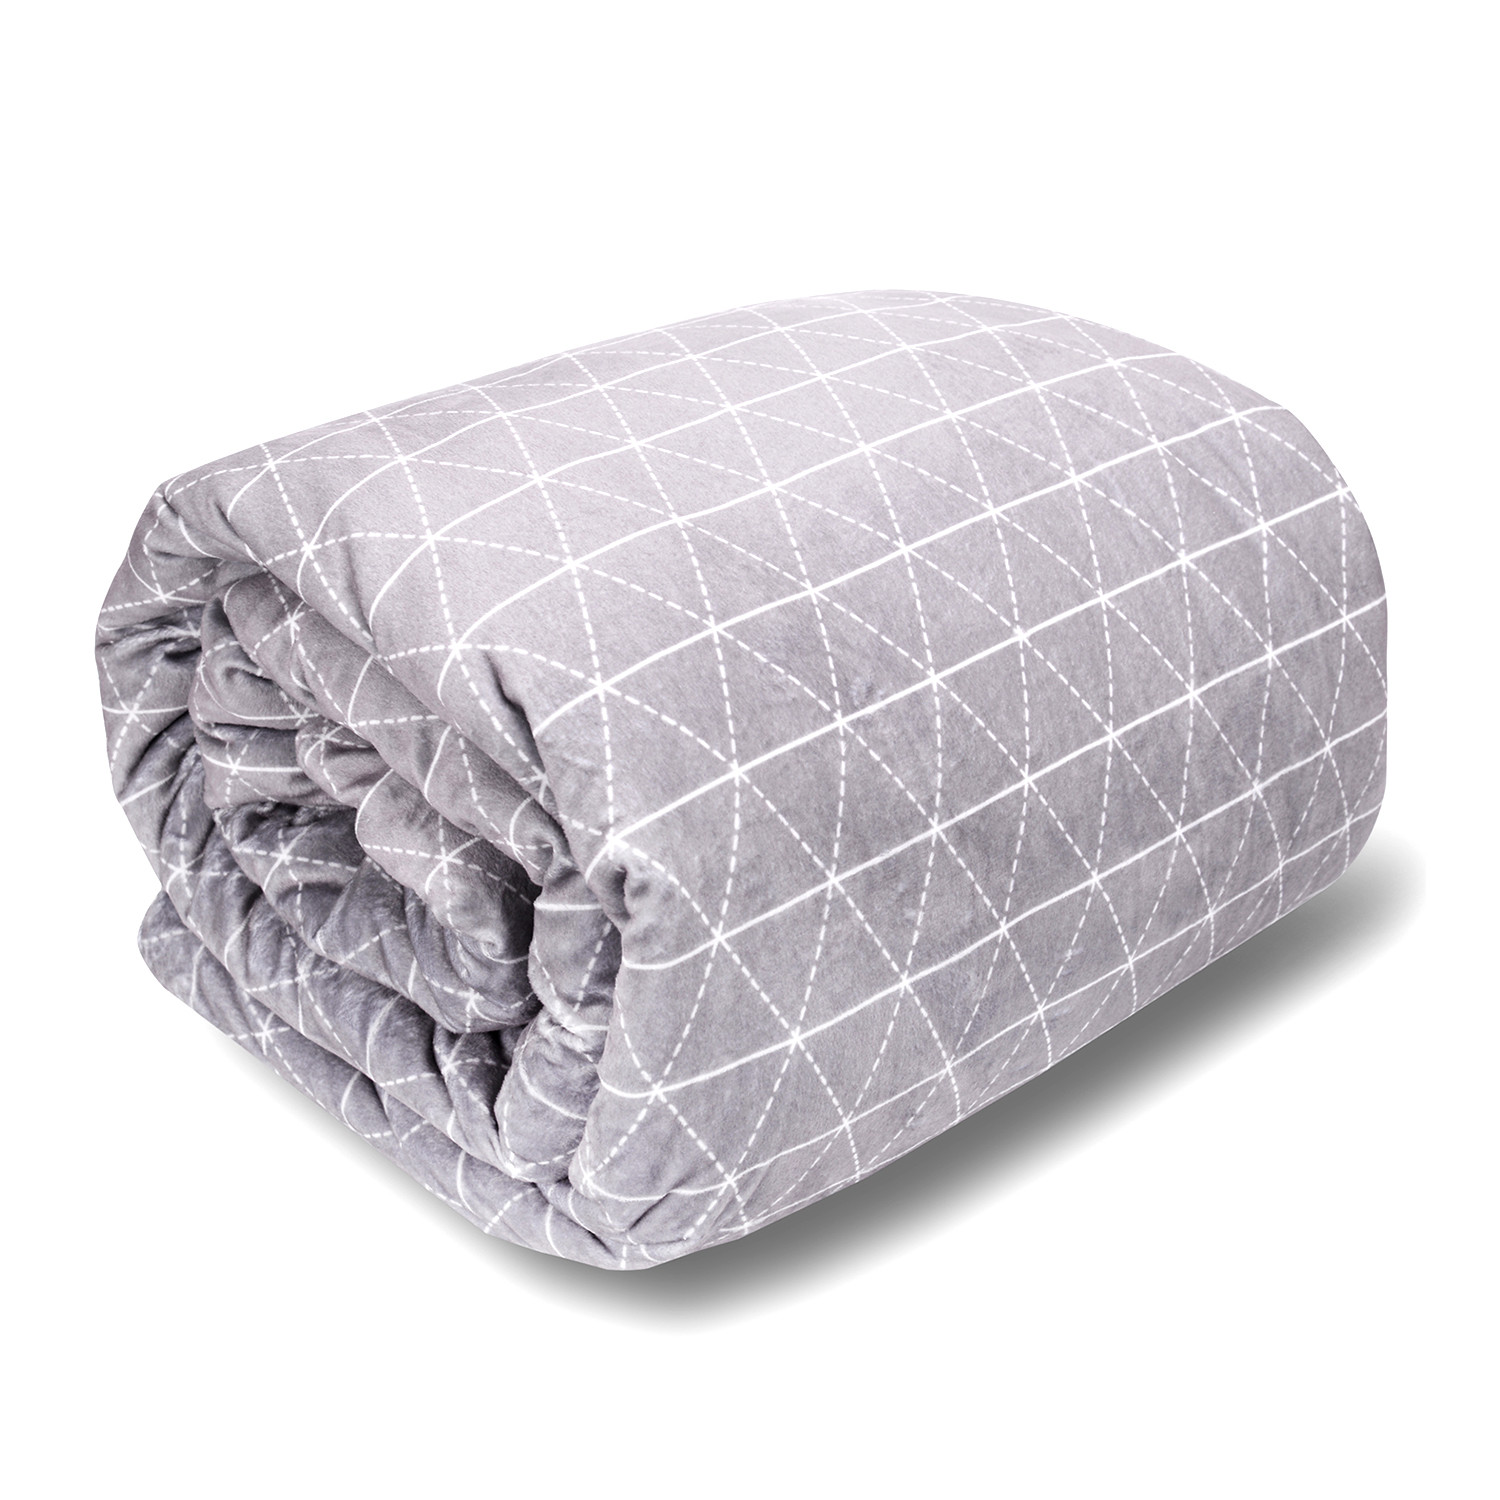 Weighted Blanket // Minky Cover + Cotton Inner Weight Sleeve // Queen